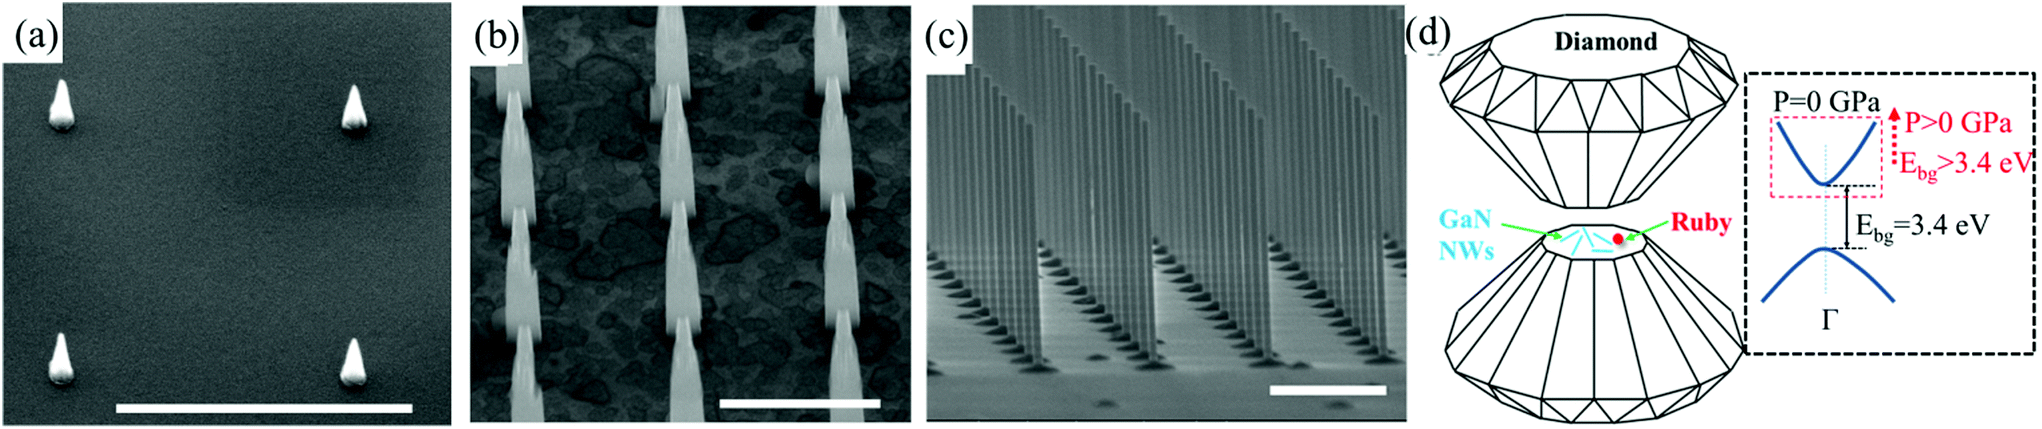 Continuous and dynamic spectral tuning of single nanowire lasers 